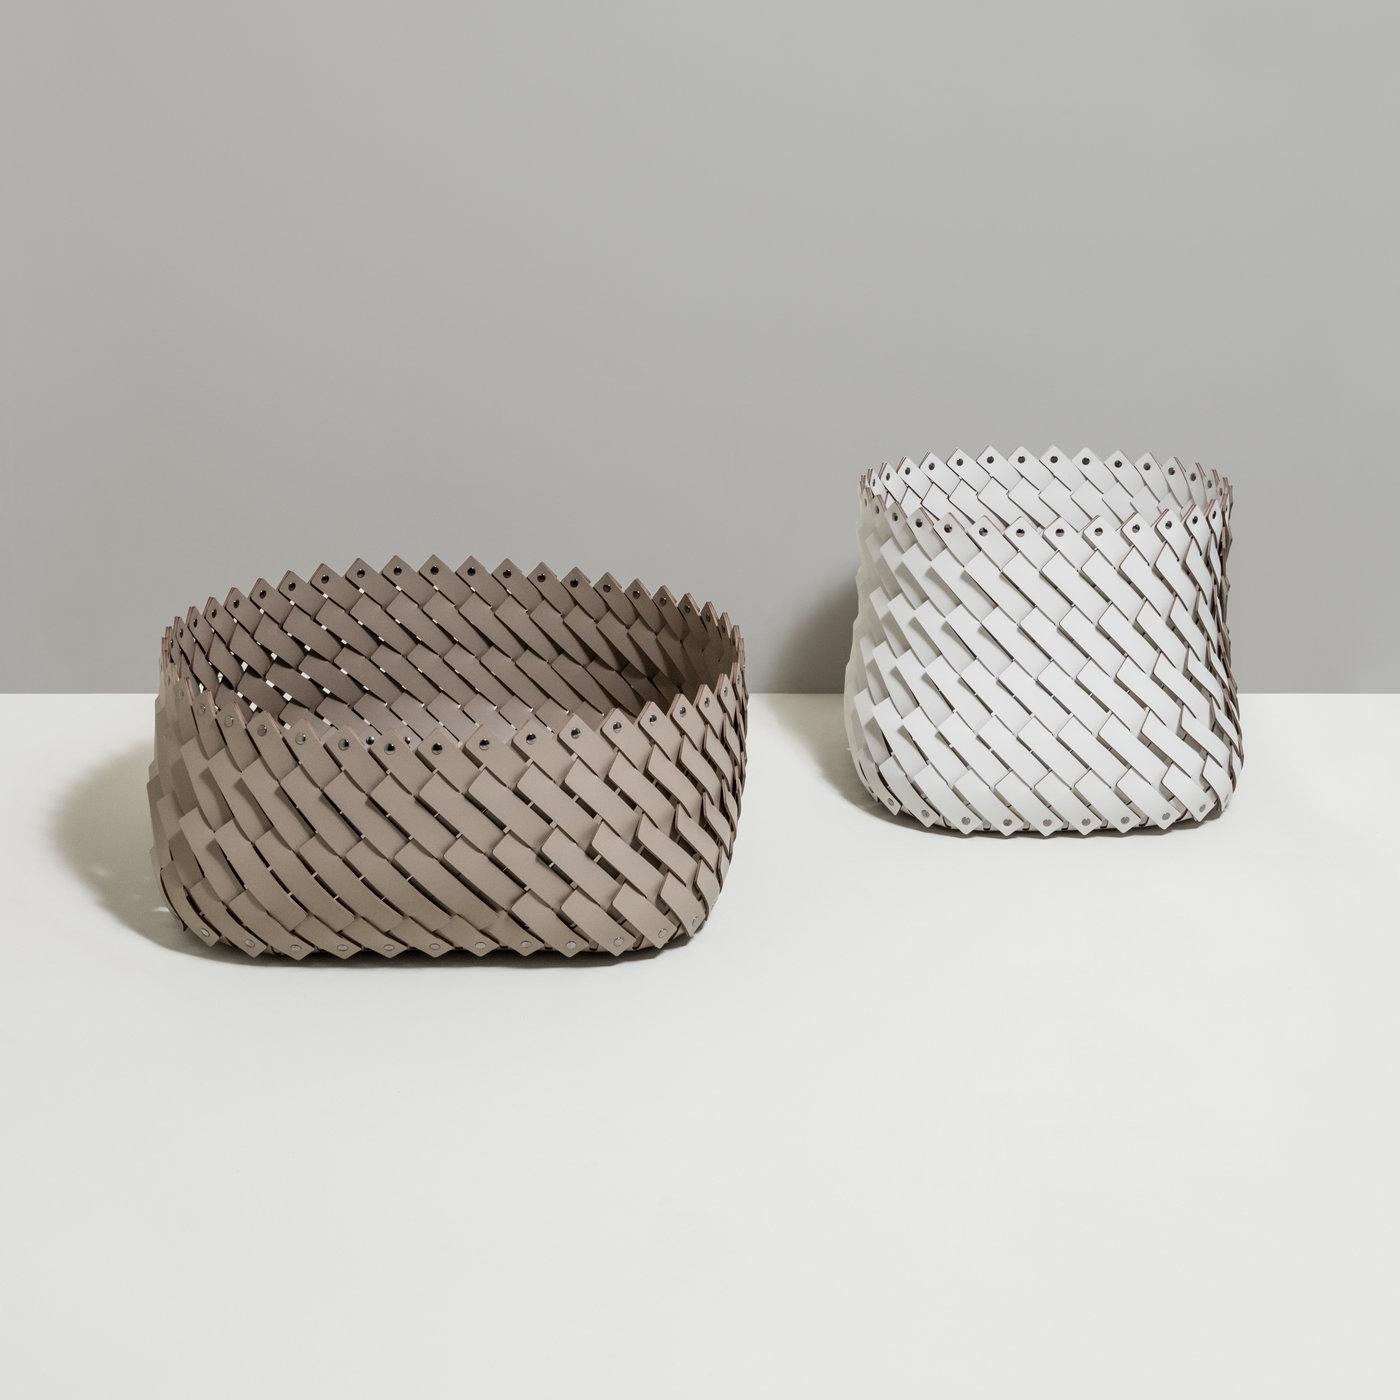 A stunning example of fine Italian craftsmanship, this basket from the Almeria Collection will fit elegantly in any interior, serving as a versatile accessory for everyday life needs. Handmade of eco-friendly, washable, and weather-resistant leather